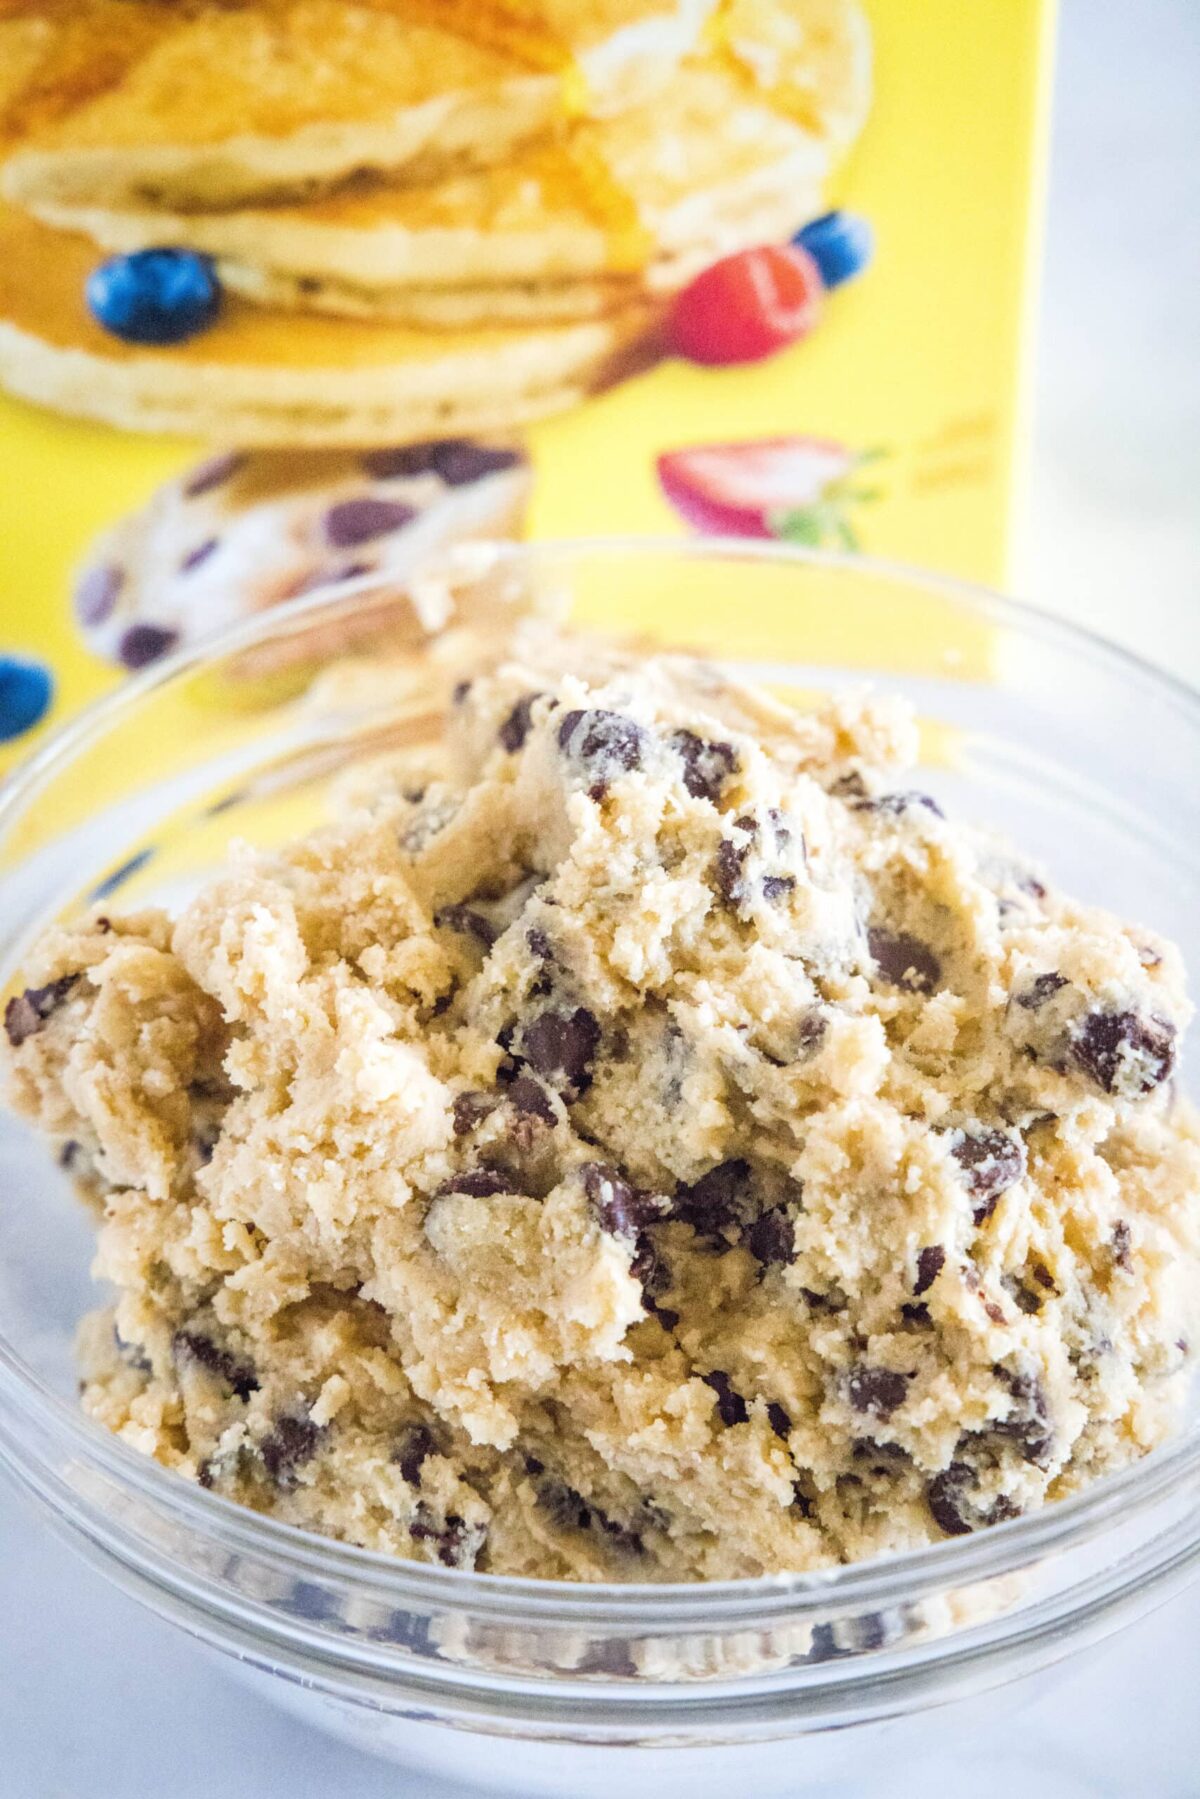 A mixing bowl full of chocolate chip cookie dough in front of a box of Bisquick